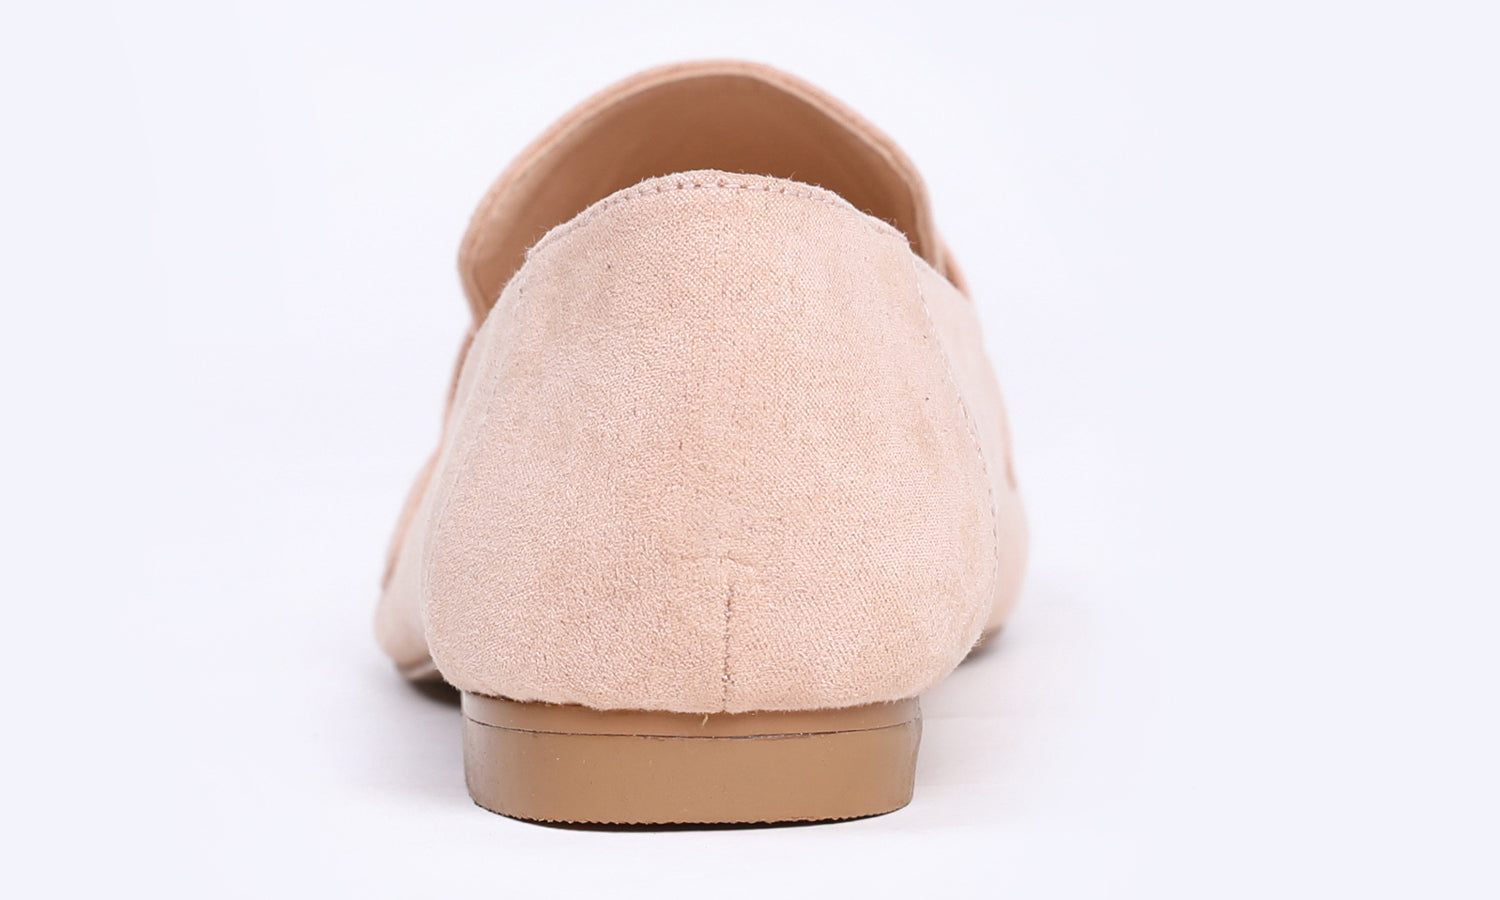 Feversole Women's Fashion Trim Deco Loafer Slippers Nude Suede